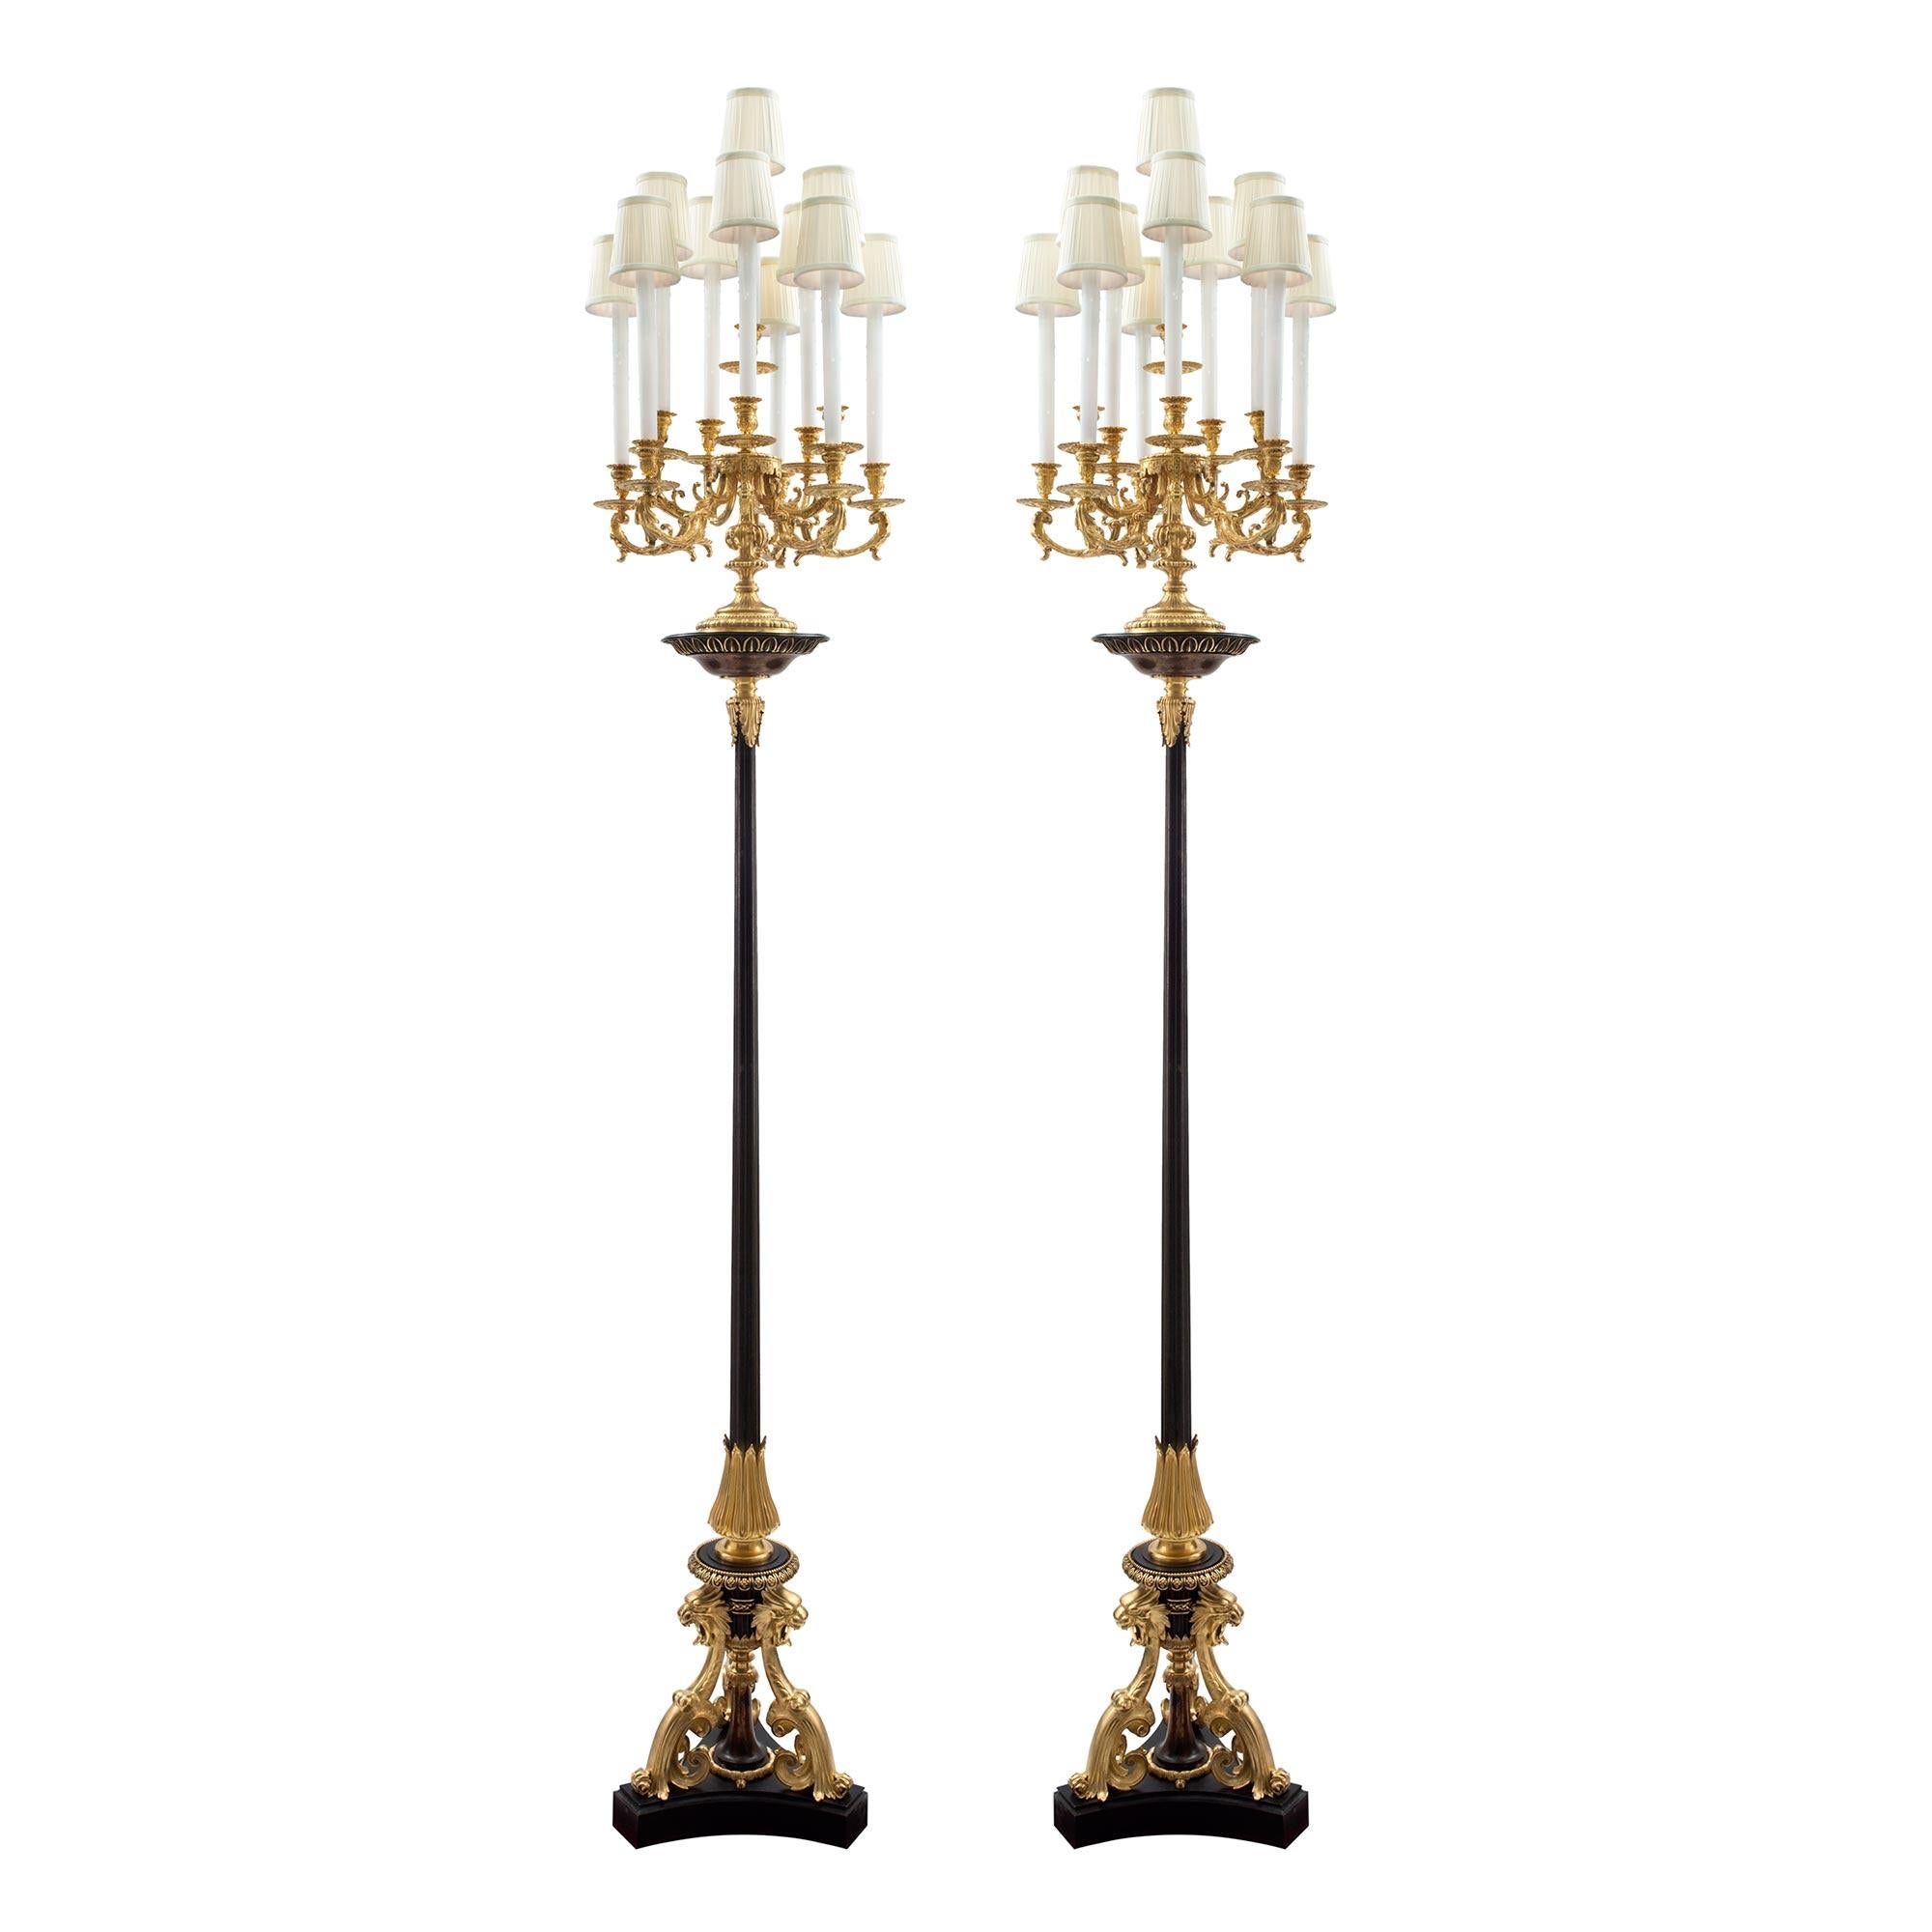 A sensational and large-scale pair of French 19th century Renaissance st. ormolu and patinated bronze eleven light floor lamps / torchières attributed to Henri Picard. Each floor lamp is raised by a fine triangular base with concave sides and a